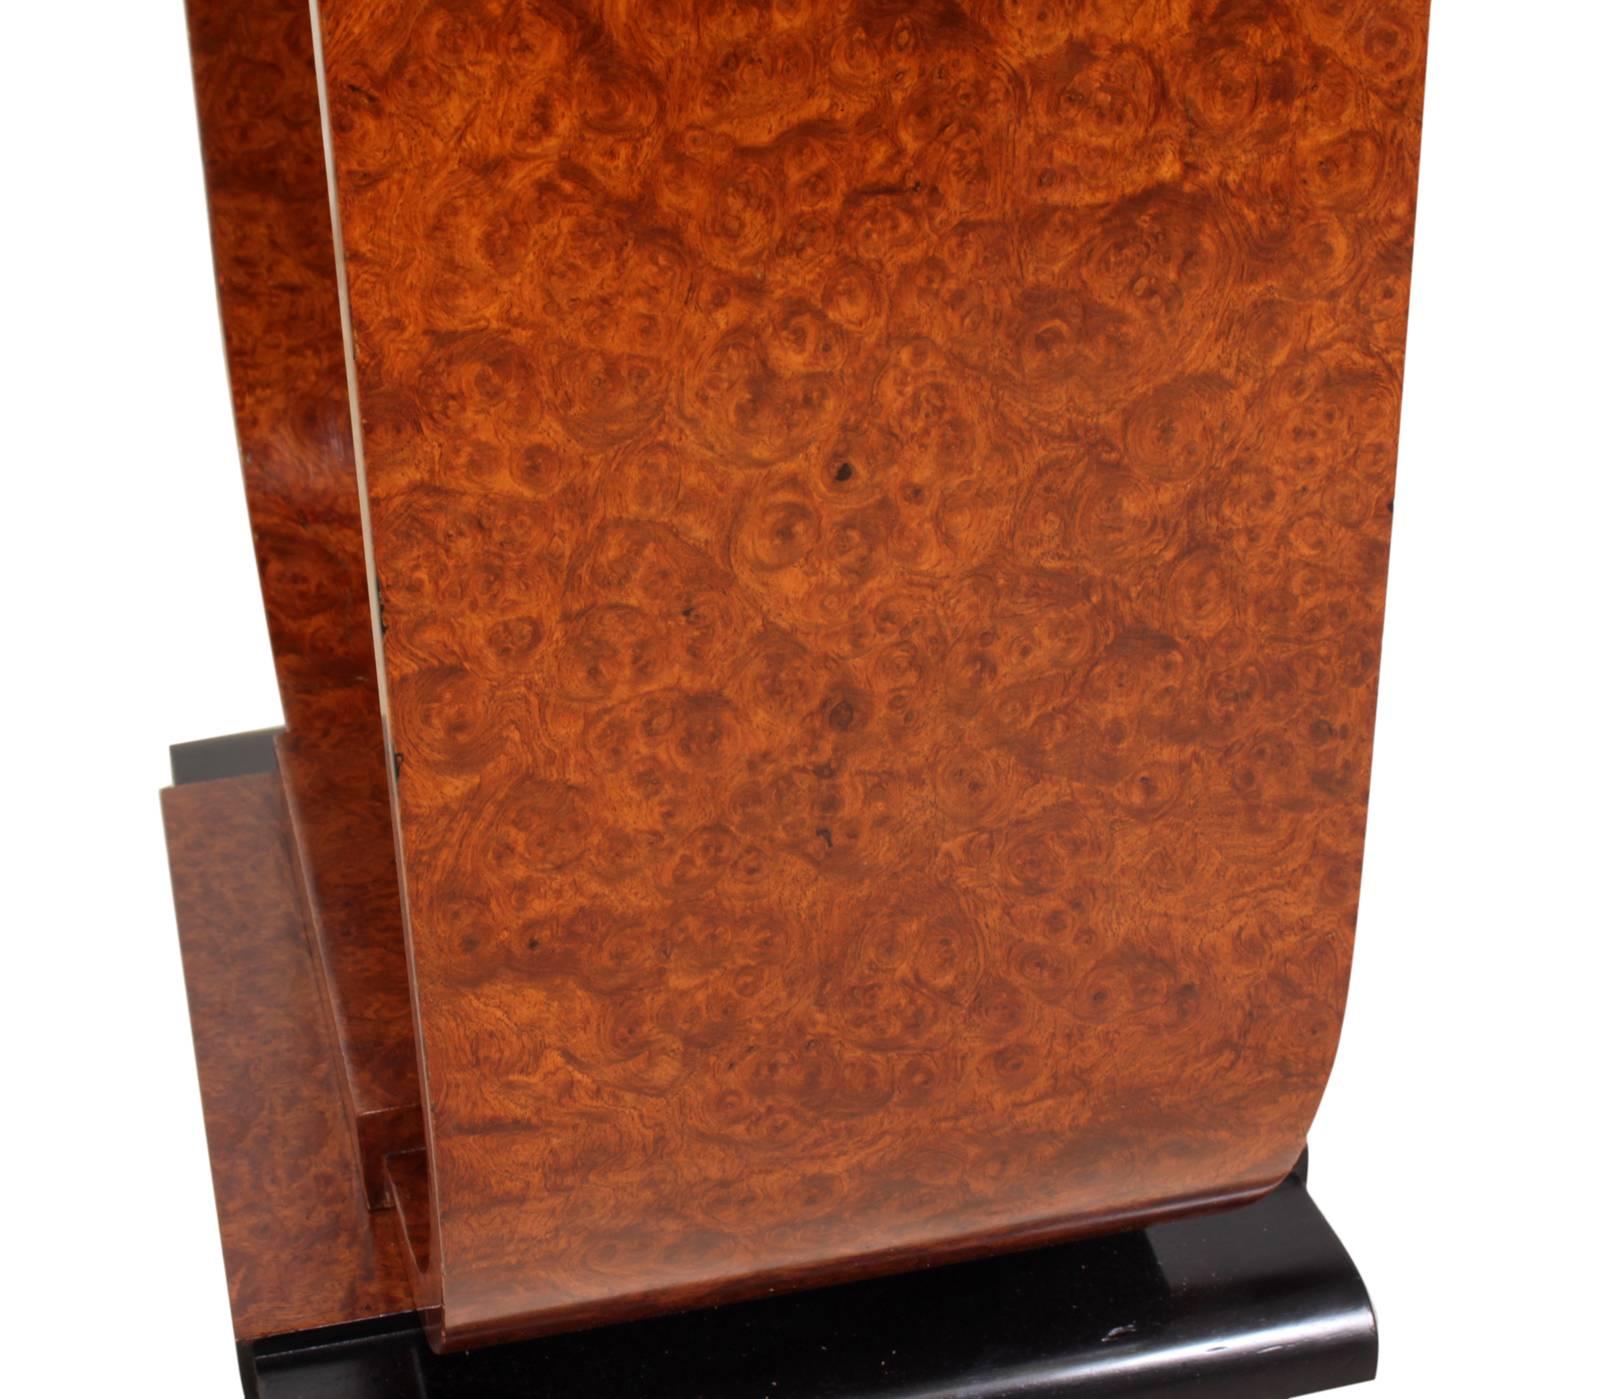 Art Deco table in burr walnut, circa 1920
A burr walnut side table with U-shaped base, produced in France in the 1920s the table is in excellent condition and has been fully restored and hand polished

Age: 1920

Style: Art Deco

Material: